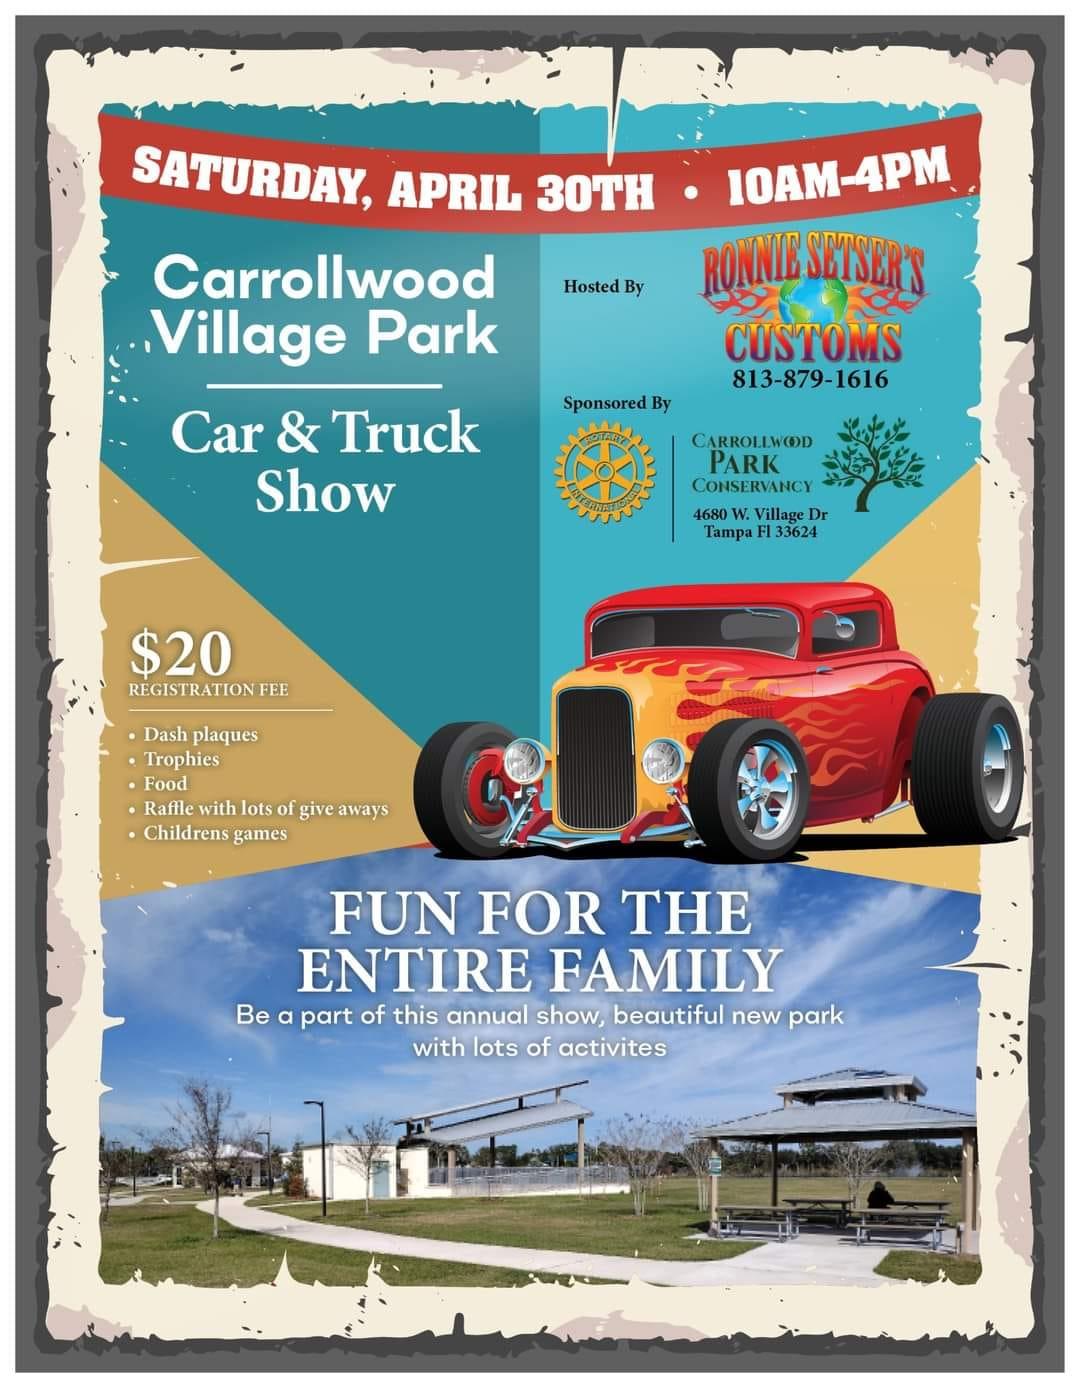 Carrollwood Village Park Car & Truck Show hosted by Ronnie Setser